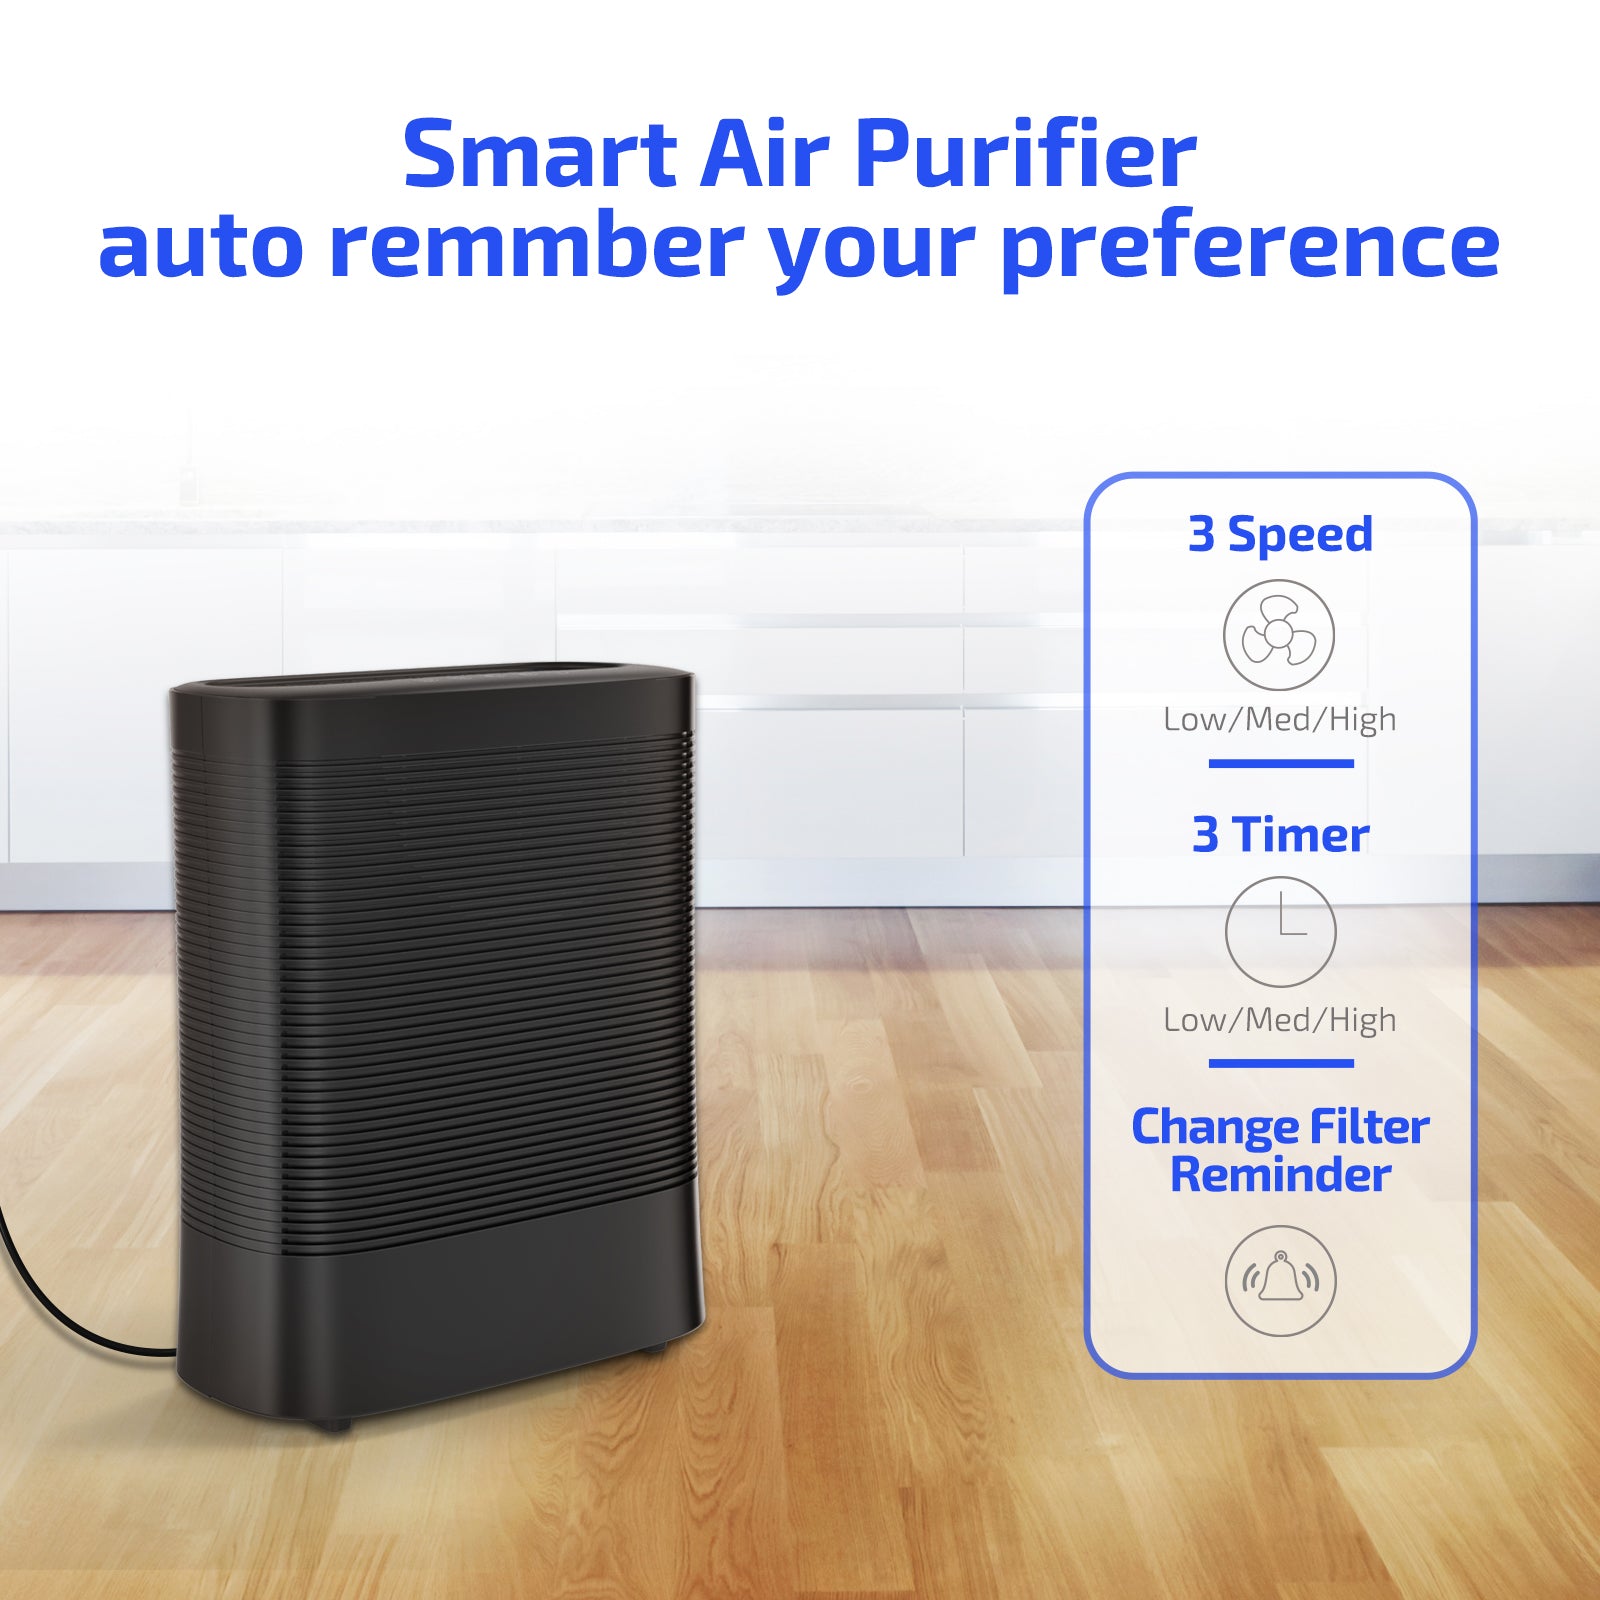 Air Purifiers AP010,with UV-C Light Sanitizer, Purifier with 3 in1 True HEPA Fits-Air Purifiers-ParisRhone